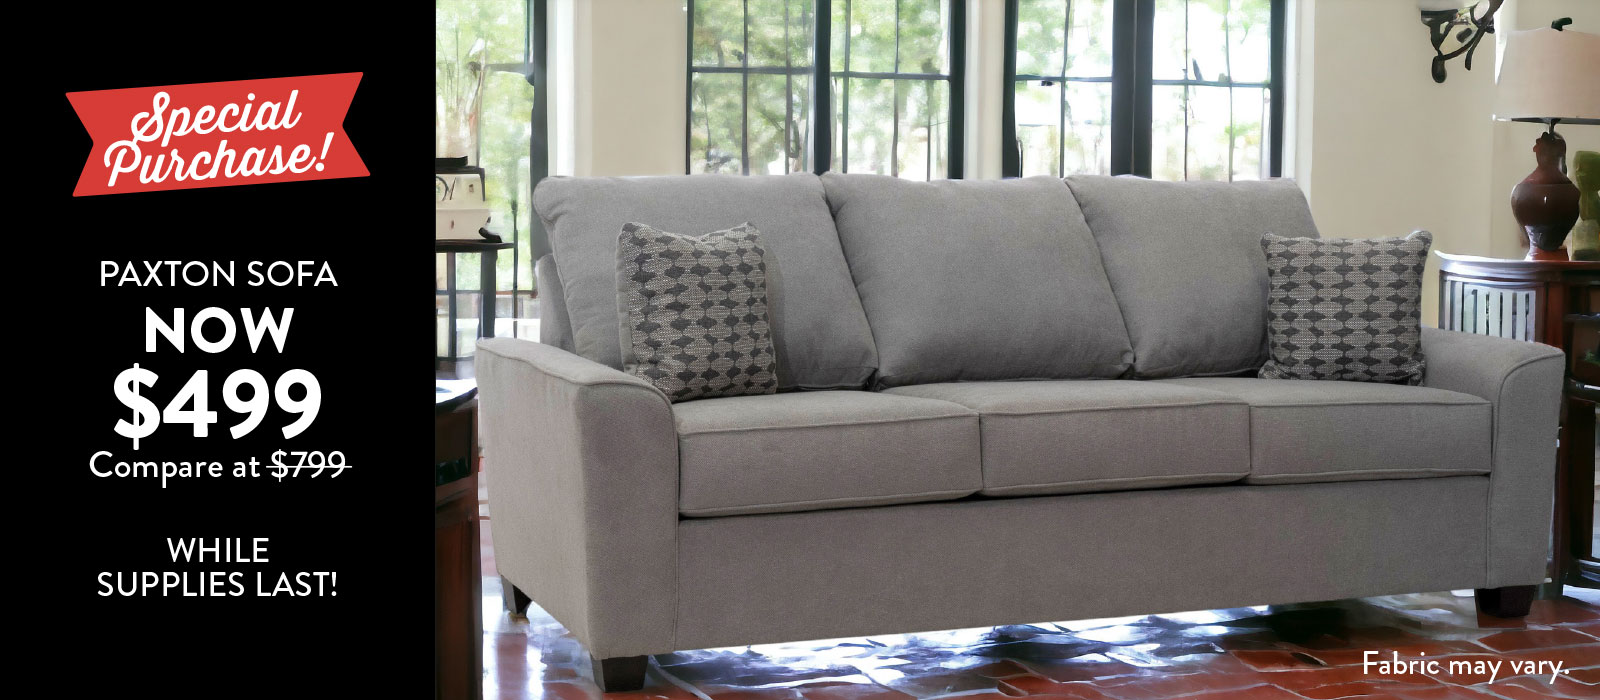 Special Purchase Paxton Sofa - Now $499